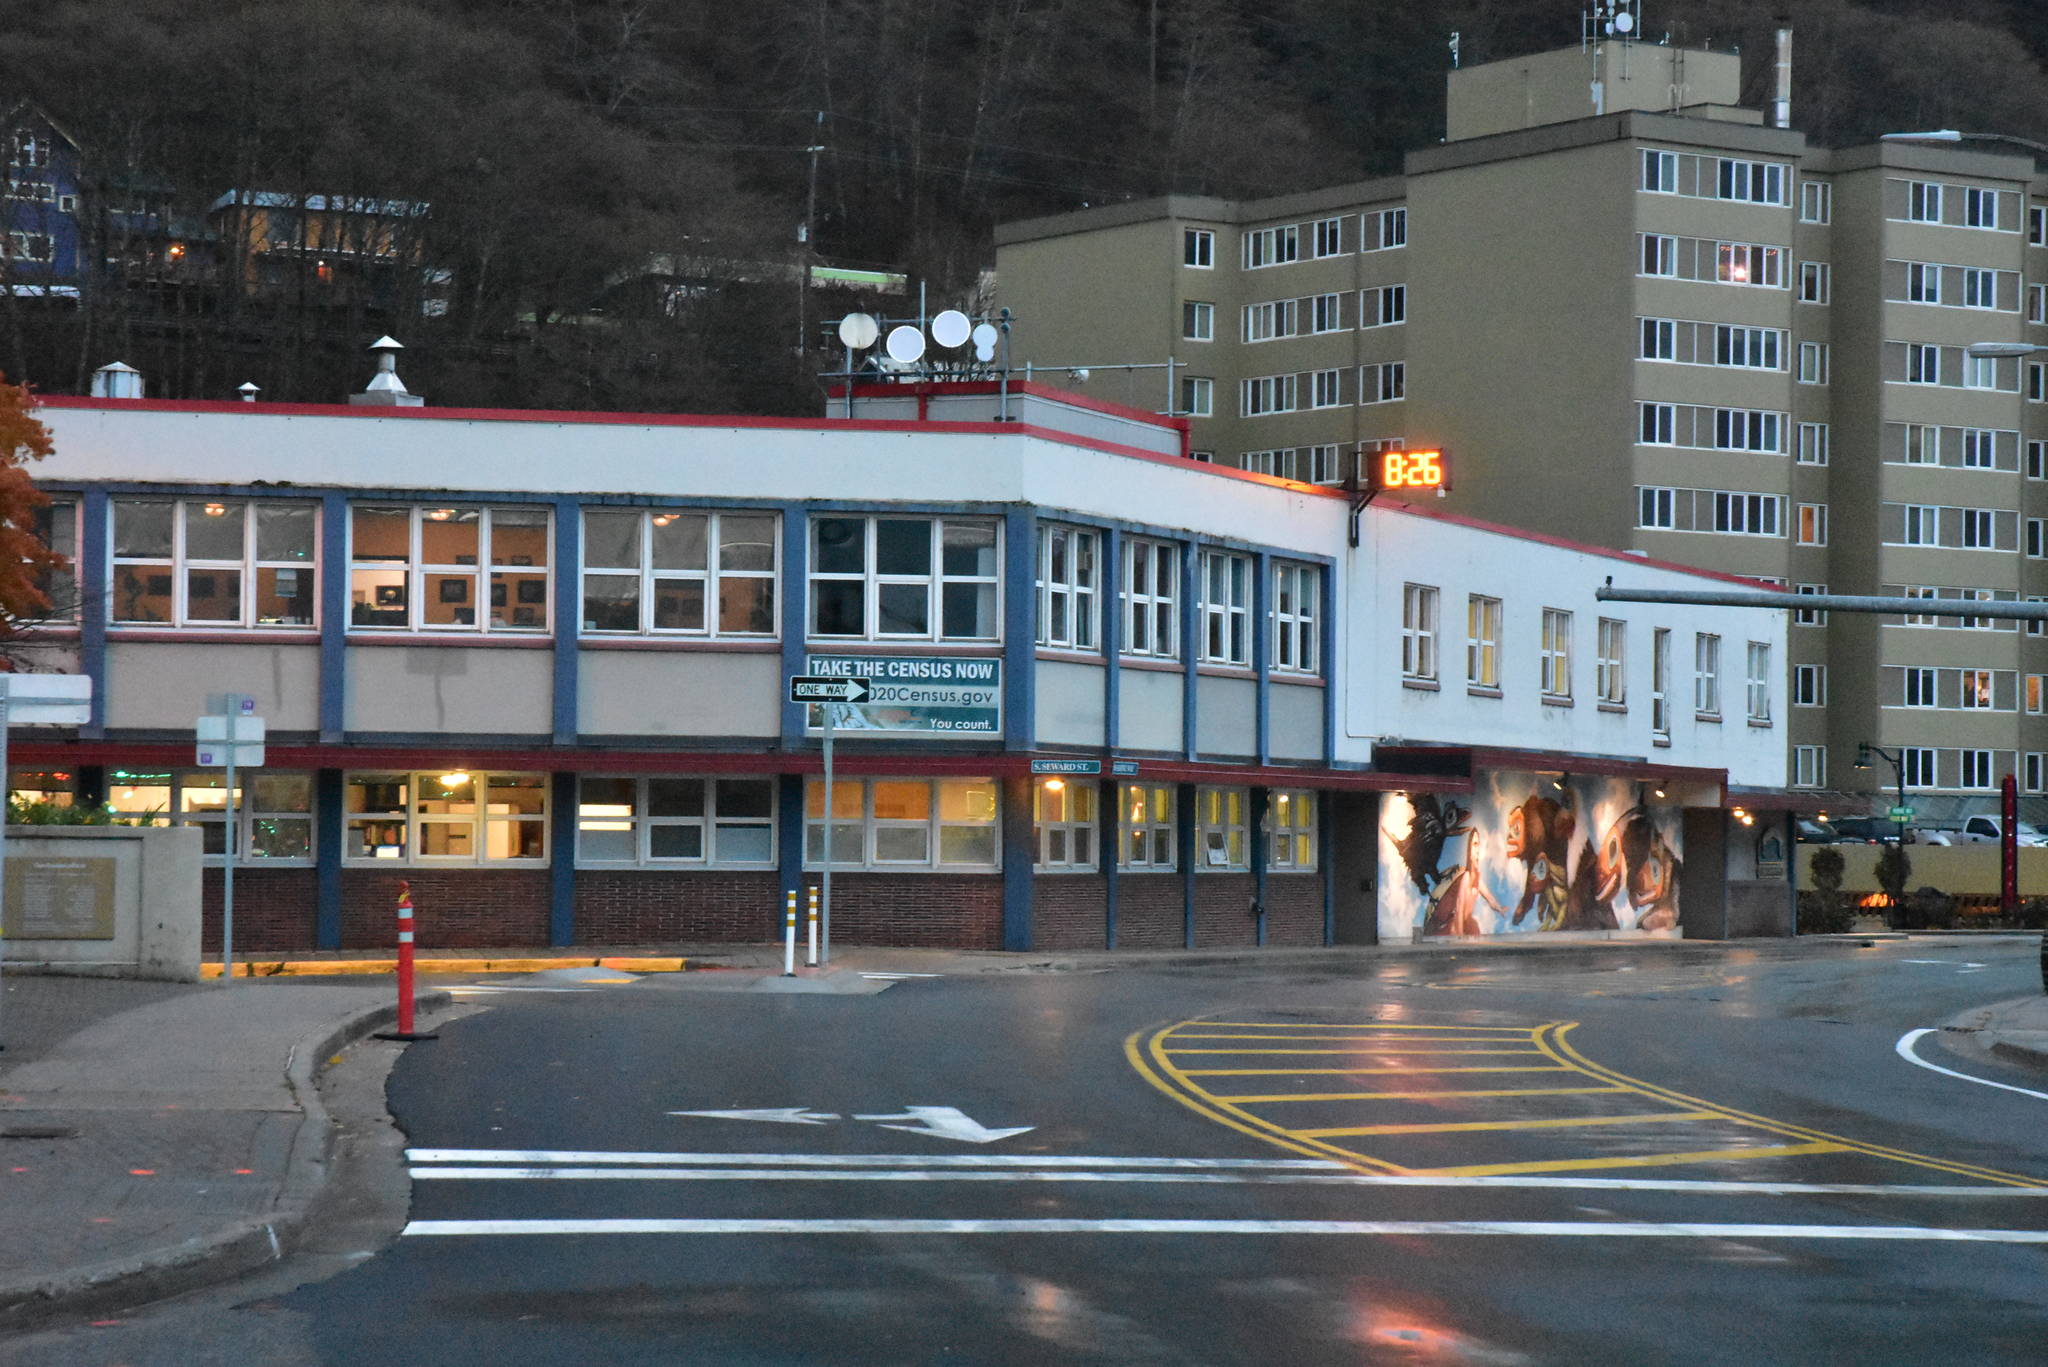 This photos shows Juneau City Hall on Tuesday. The City and Borough of Juneau passed an ordinance requiring the confidential disclosure to the city assessor’s office of the sales price of real estate transactions in the borough. (Peter Segall / Juneau Empire)